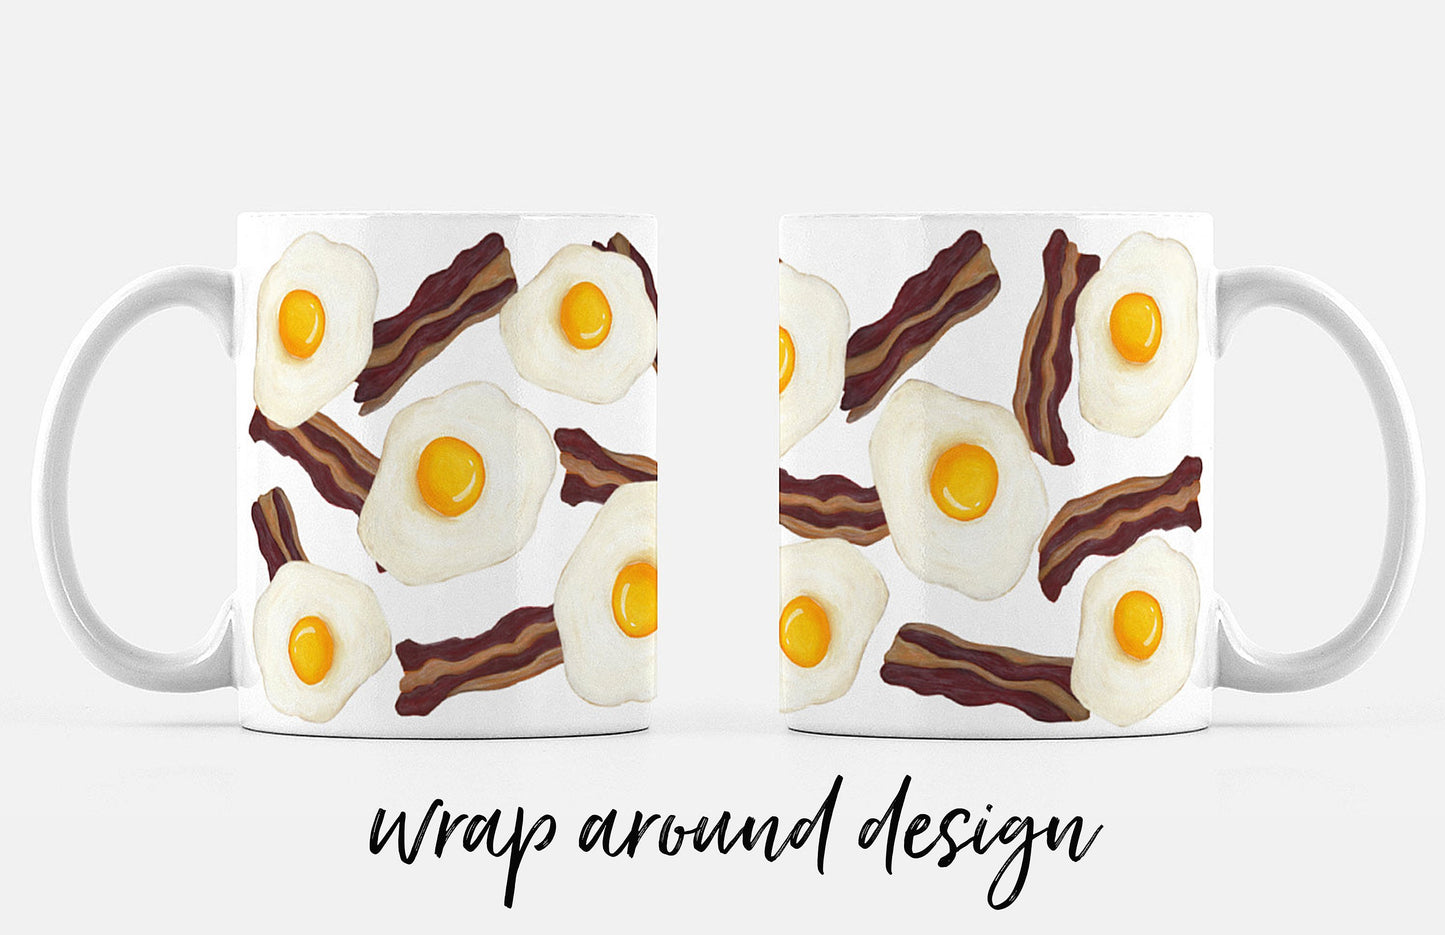 bacon and eggs pattern wraps around entire mug